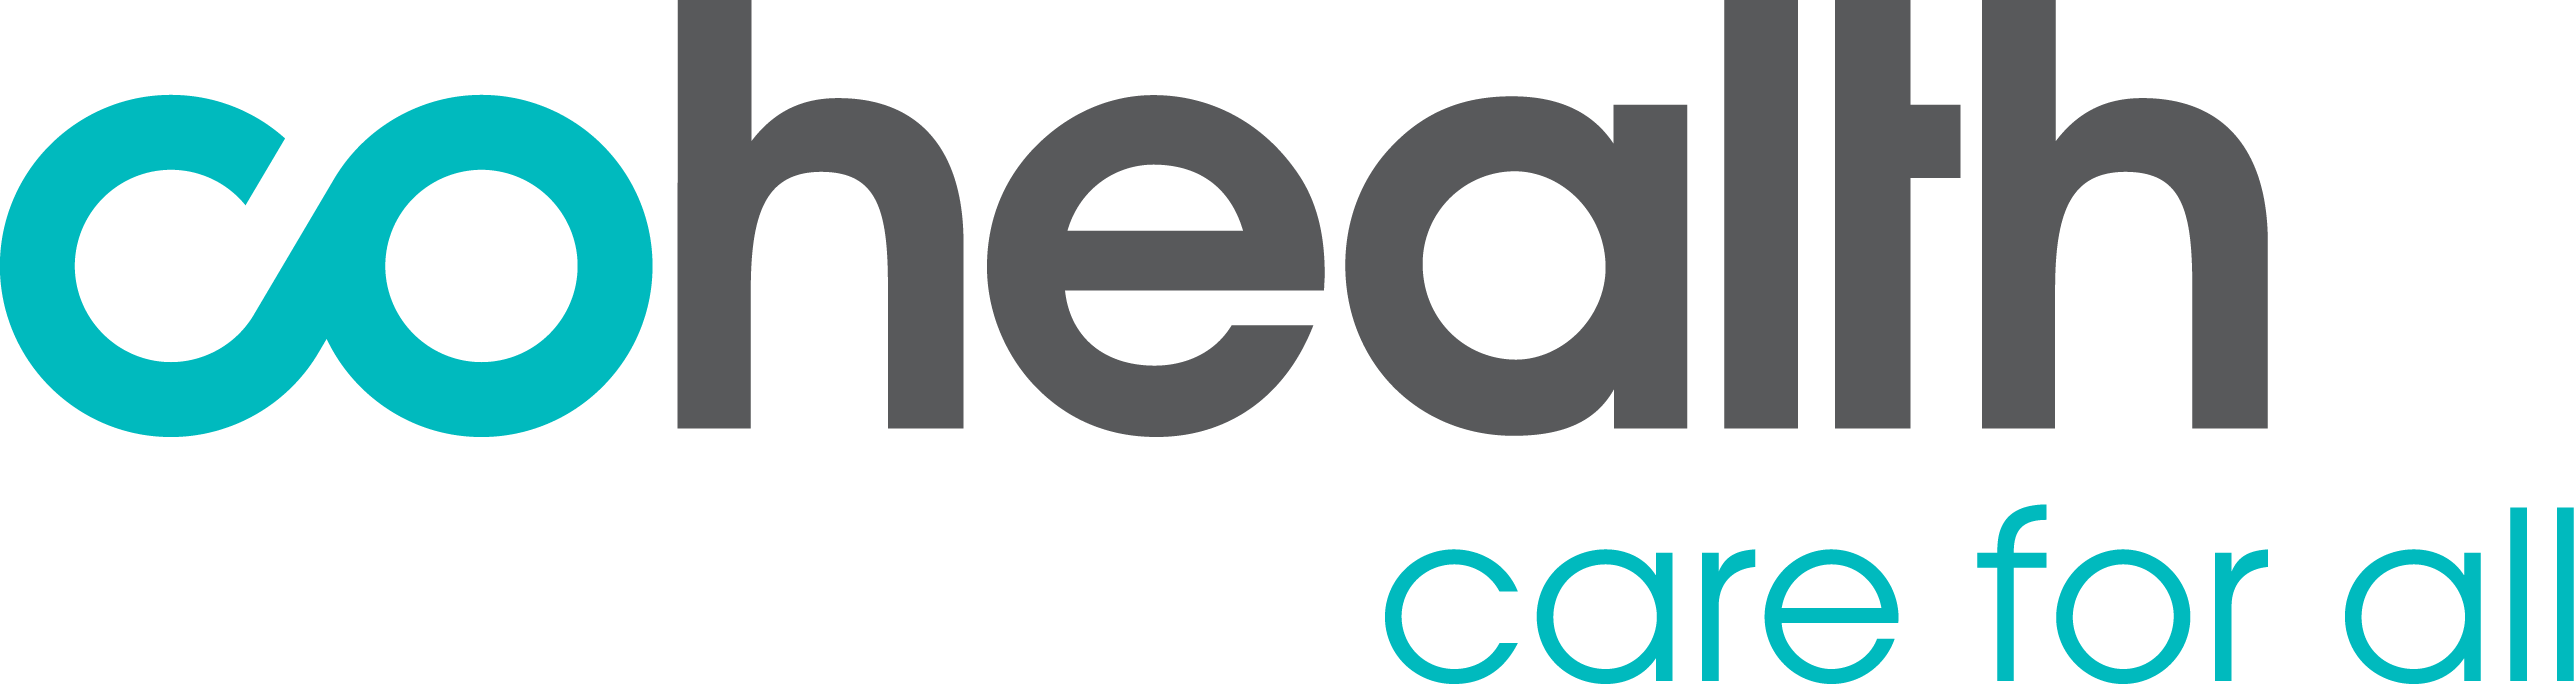 Cohealth: care for all